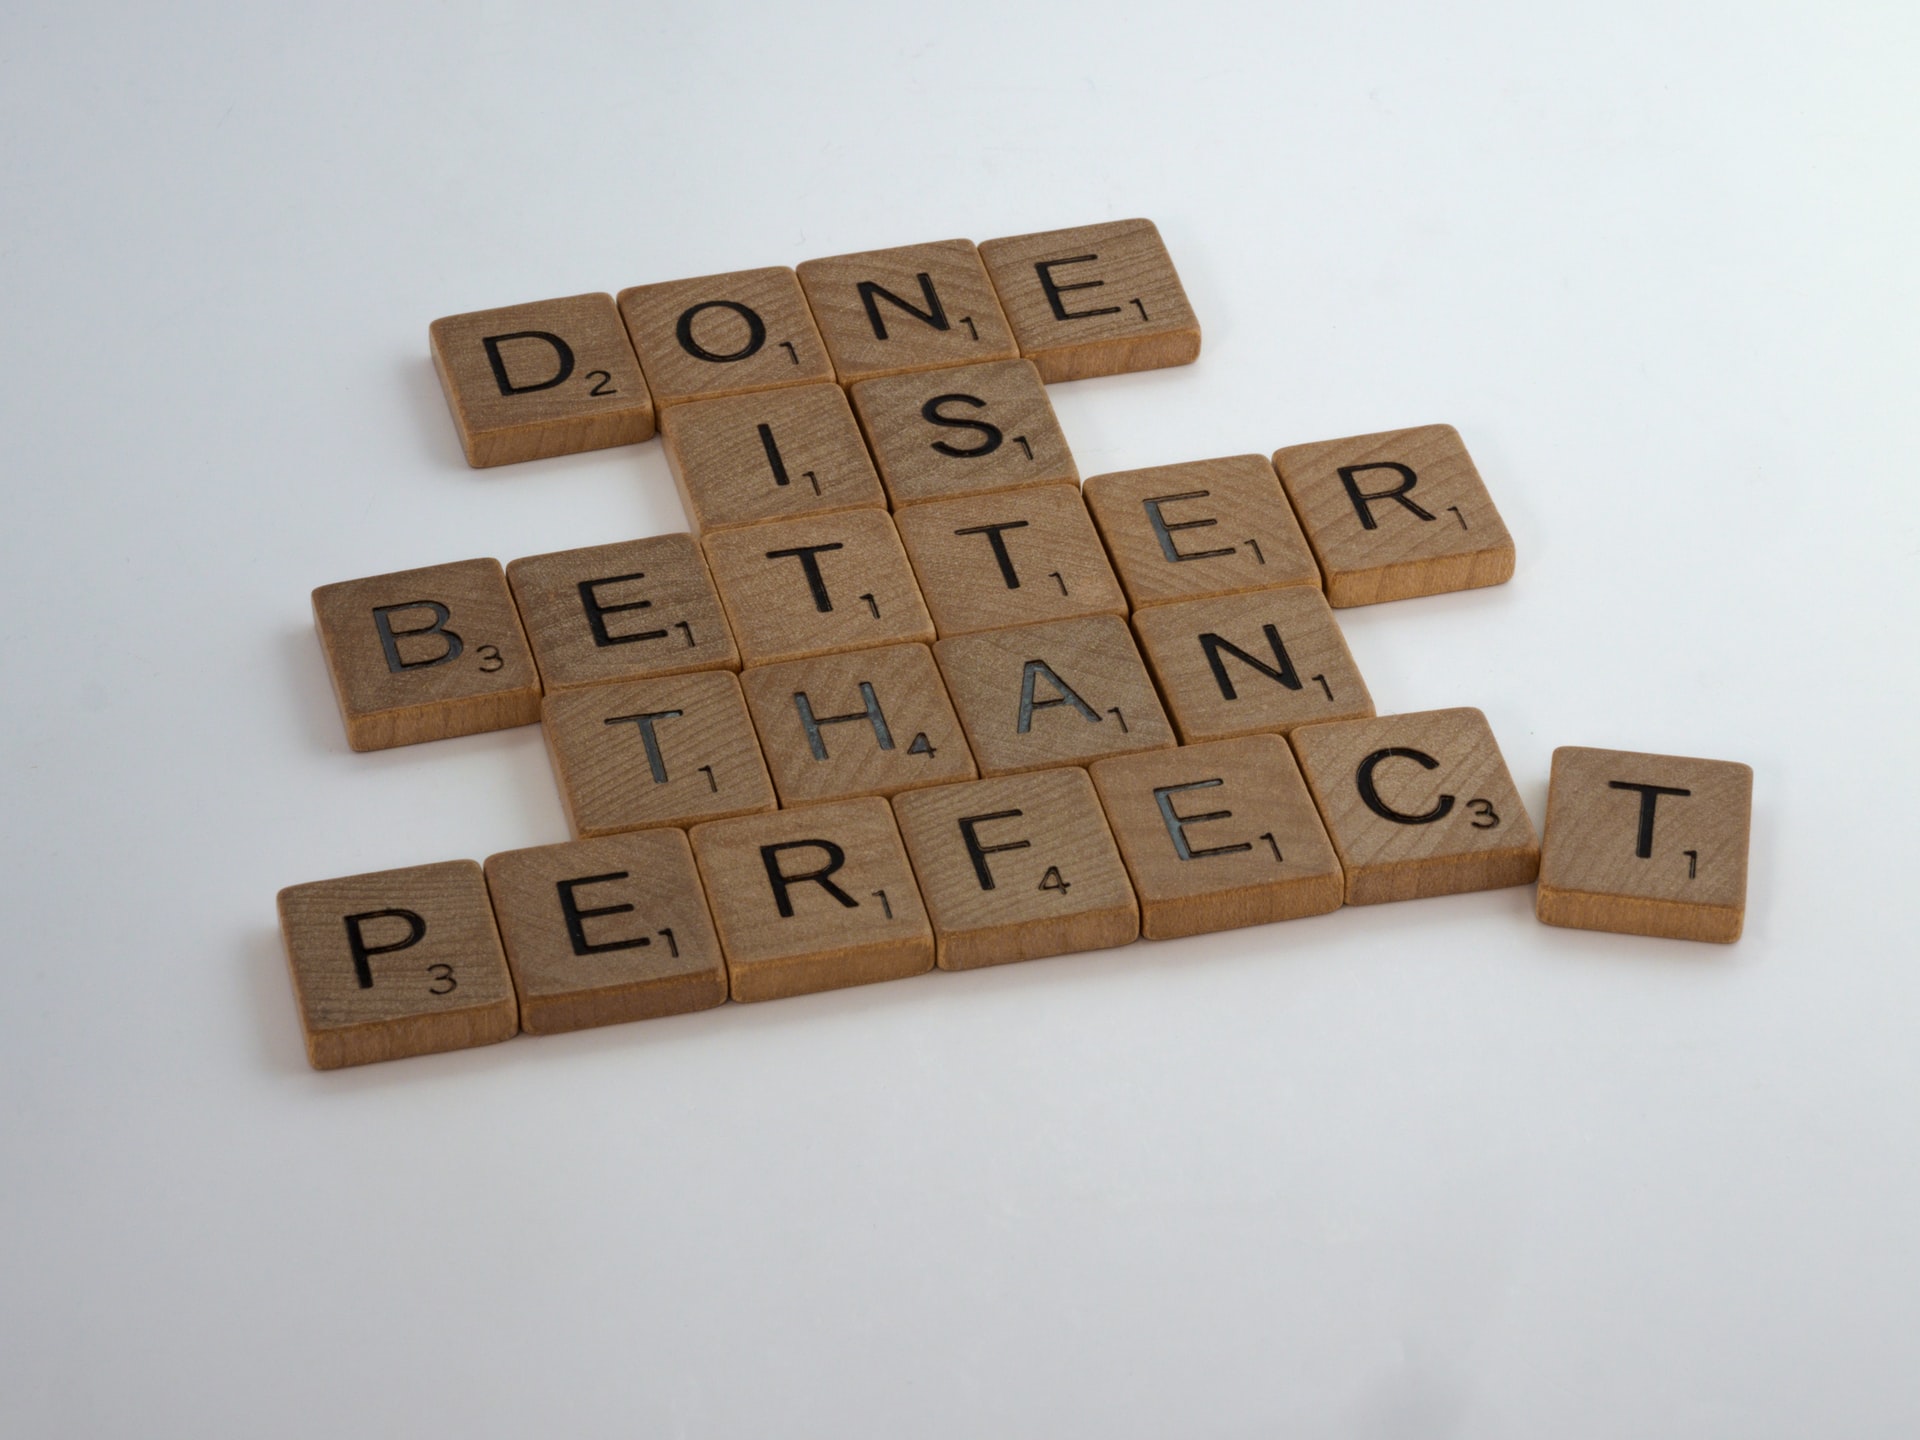 wooden letters that read "Done is better than perfect"